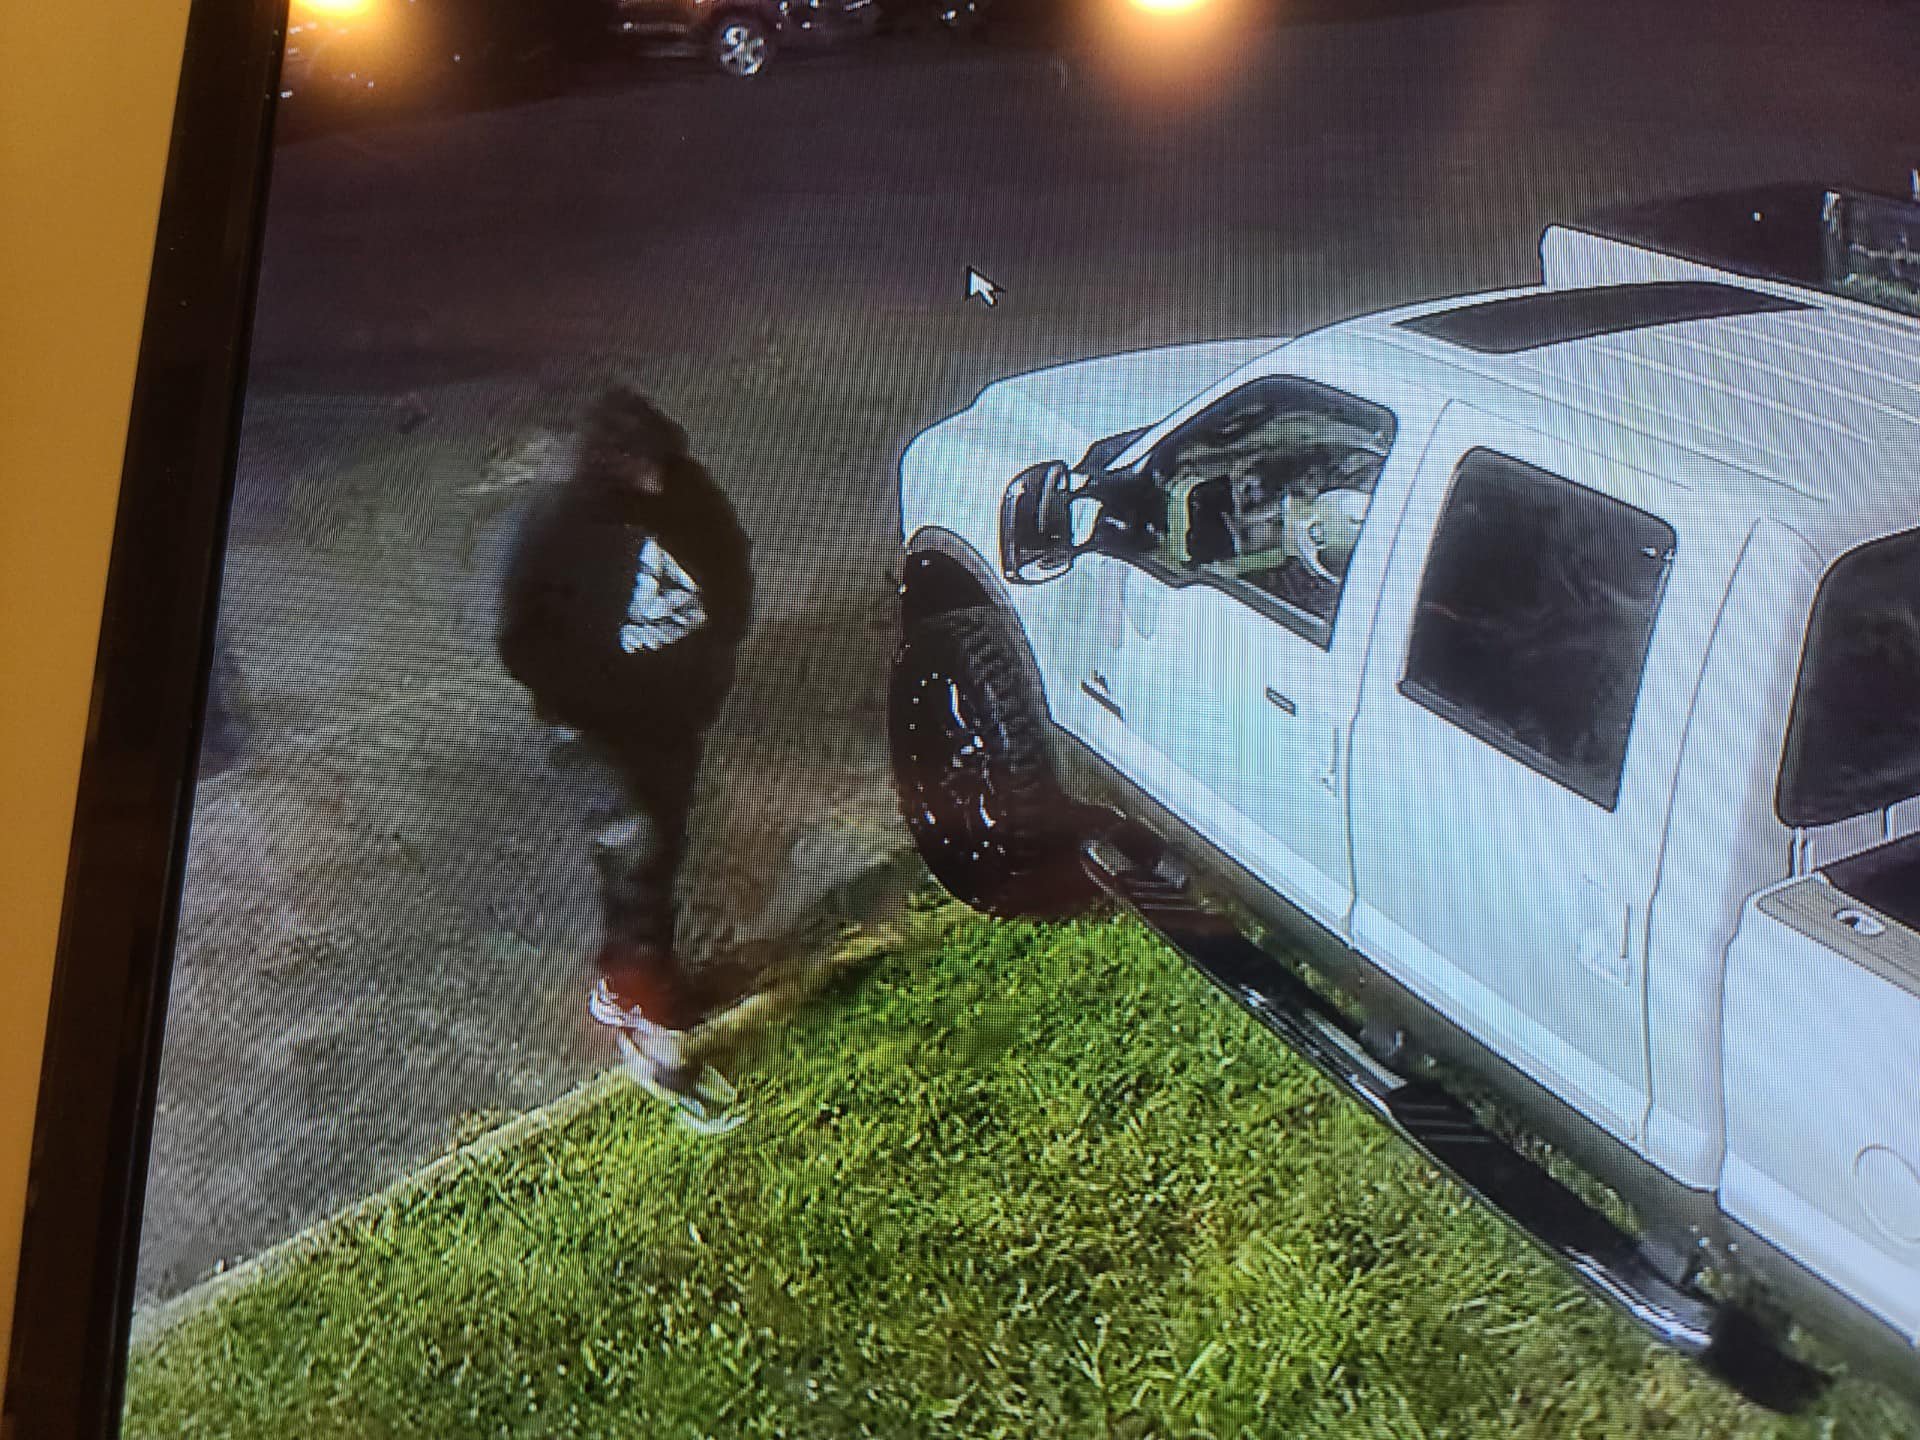  The Orange County Sheriff’s Office is investigating an attempted vehicle theft in the early morning hours of Oct. 13 at E &amp; M Auto Sales in Locust Grove. (Photo Credit: Orange County Sheriff’s Office) 